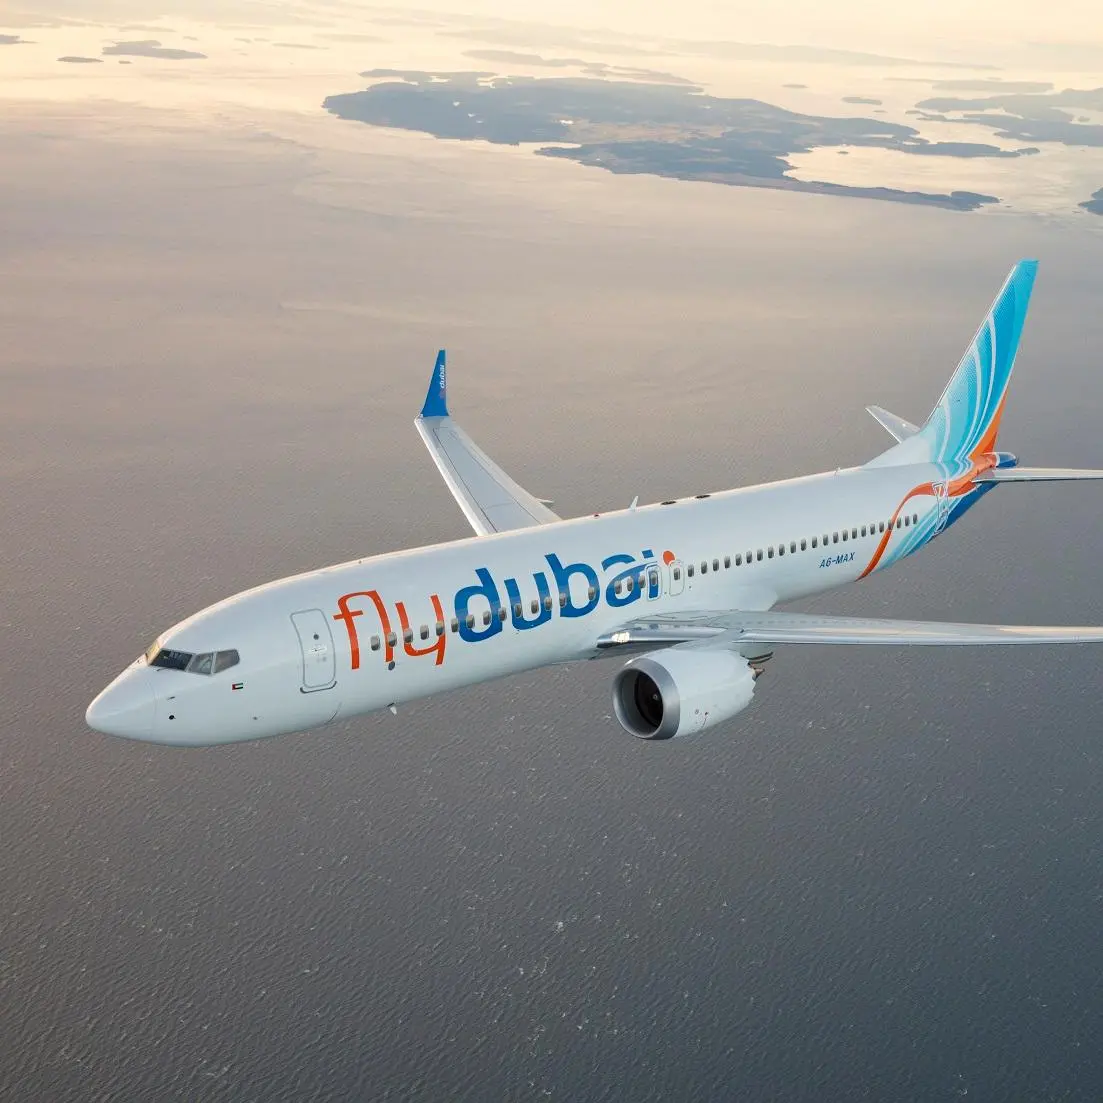 Flydubai resumes scheduled operations from DXB